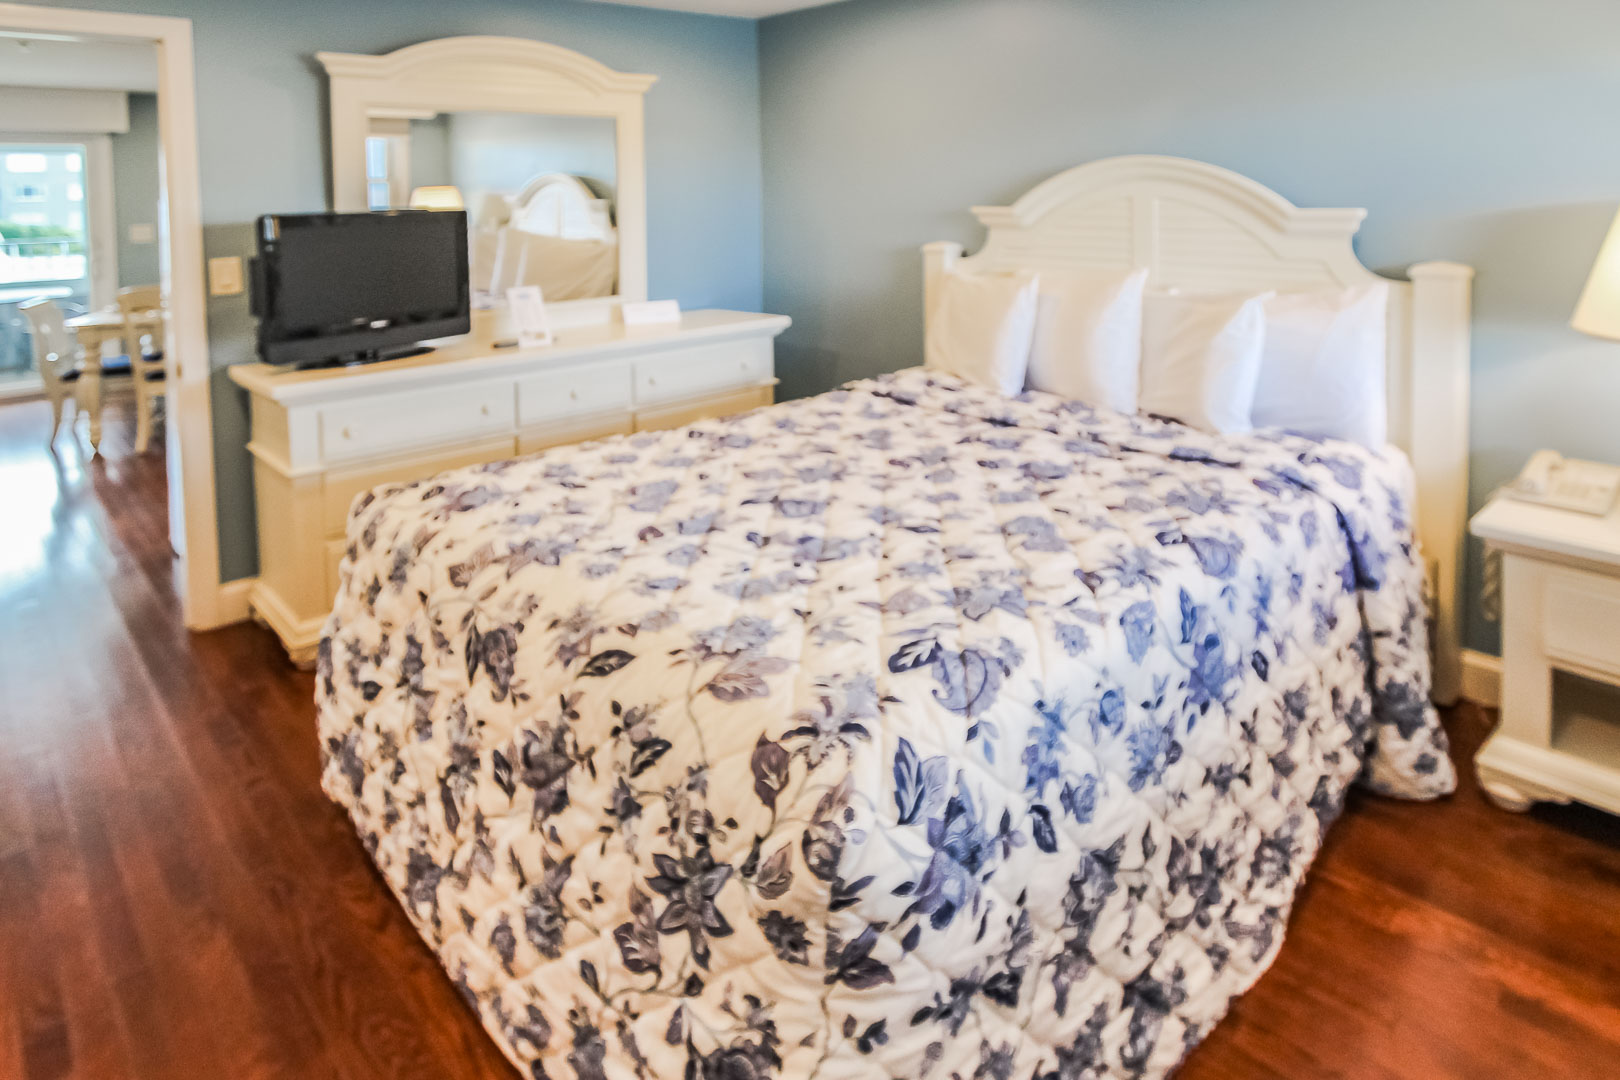 A refreshing master bedroom with a bathroom at VRI's Edgewater Beach Resort in Massachusetts.